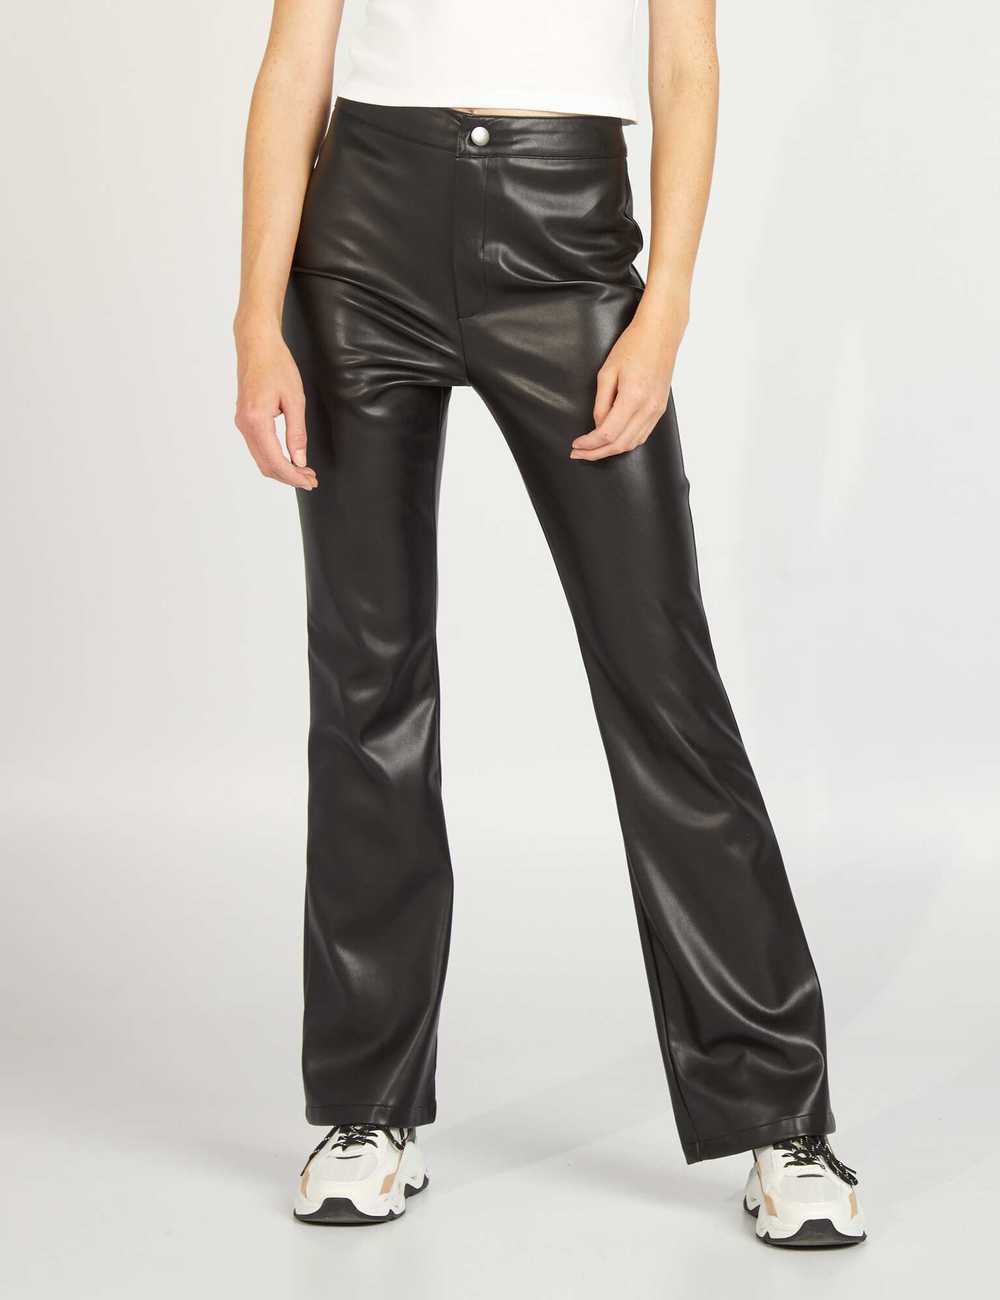 Flared faux leather trousers